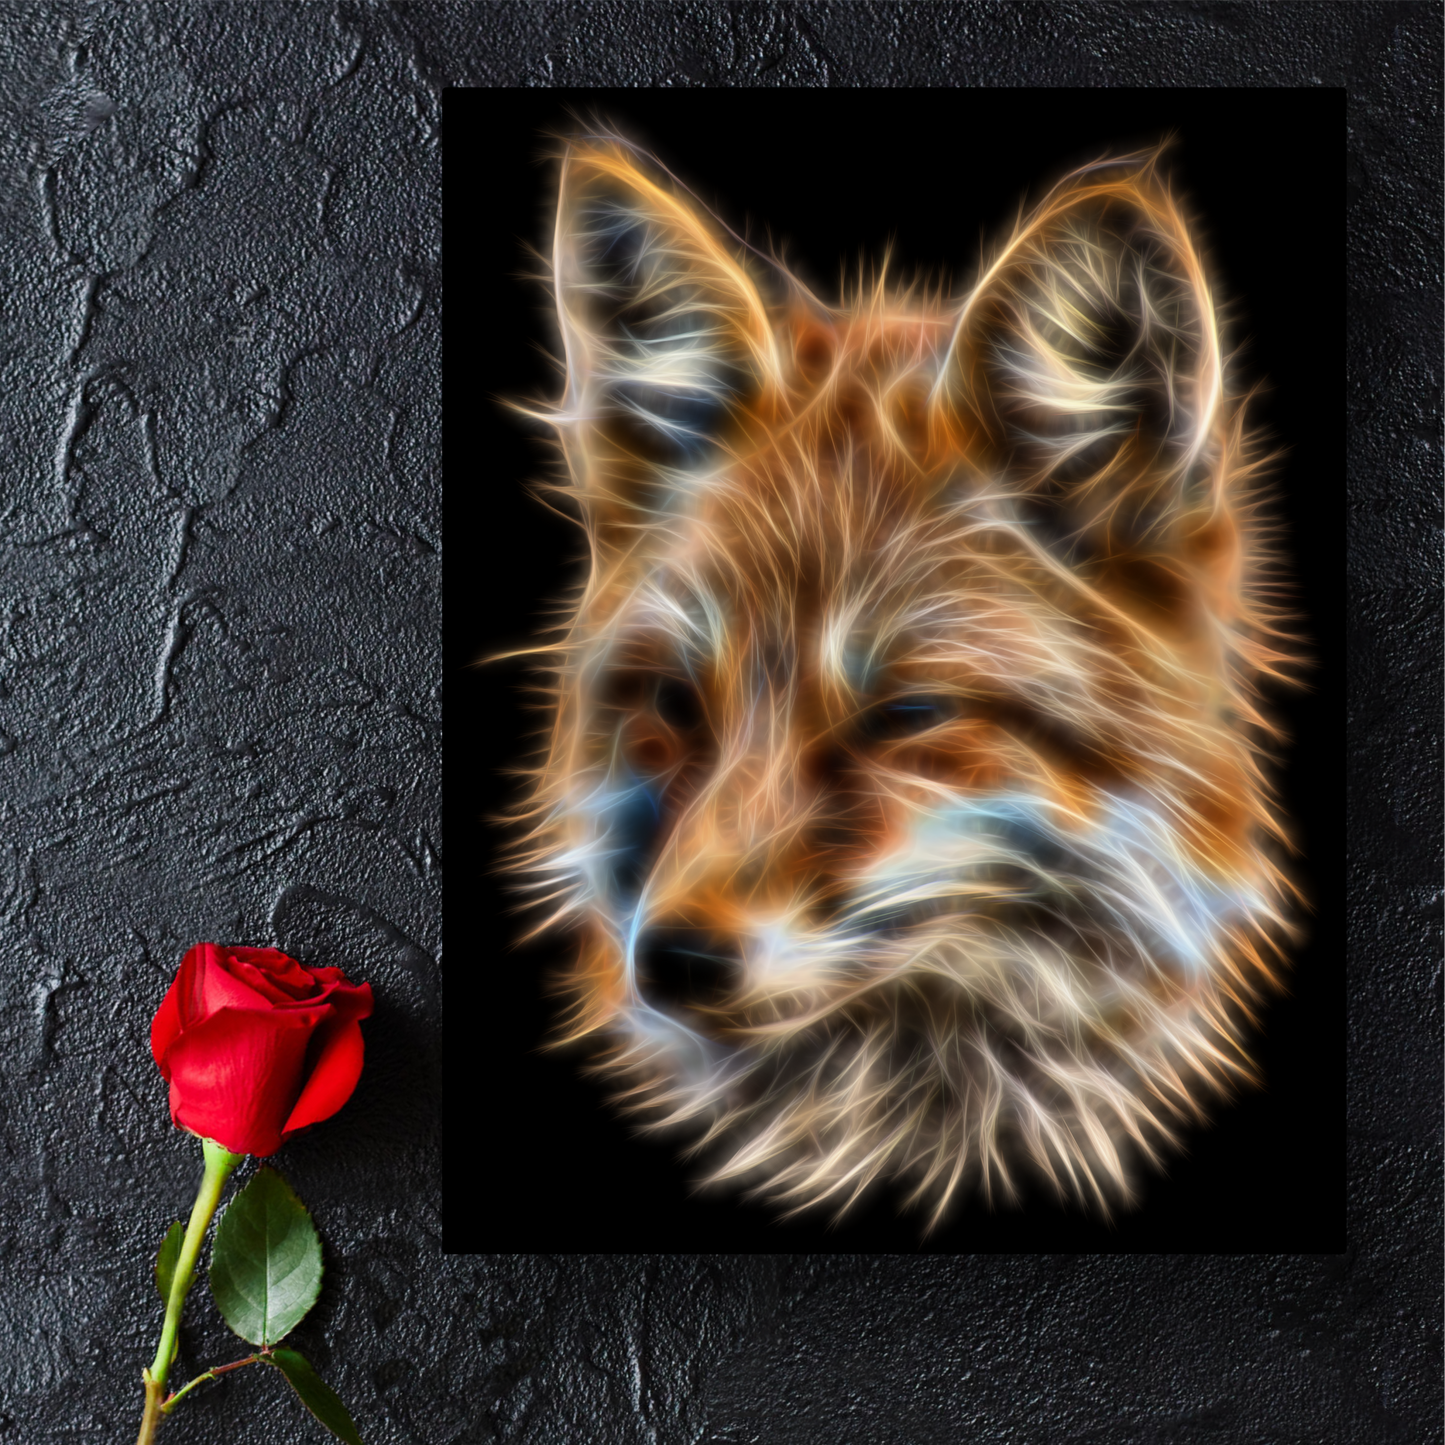 Fox Metal Wall Plaque with Stunning Fractal Art Design. Also available as Mouse Pad, Keychain or Coaster.